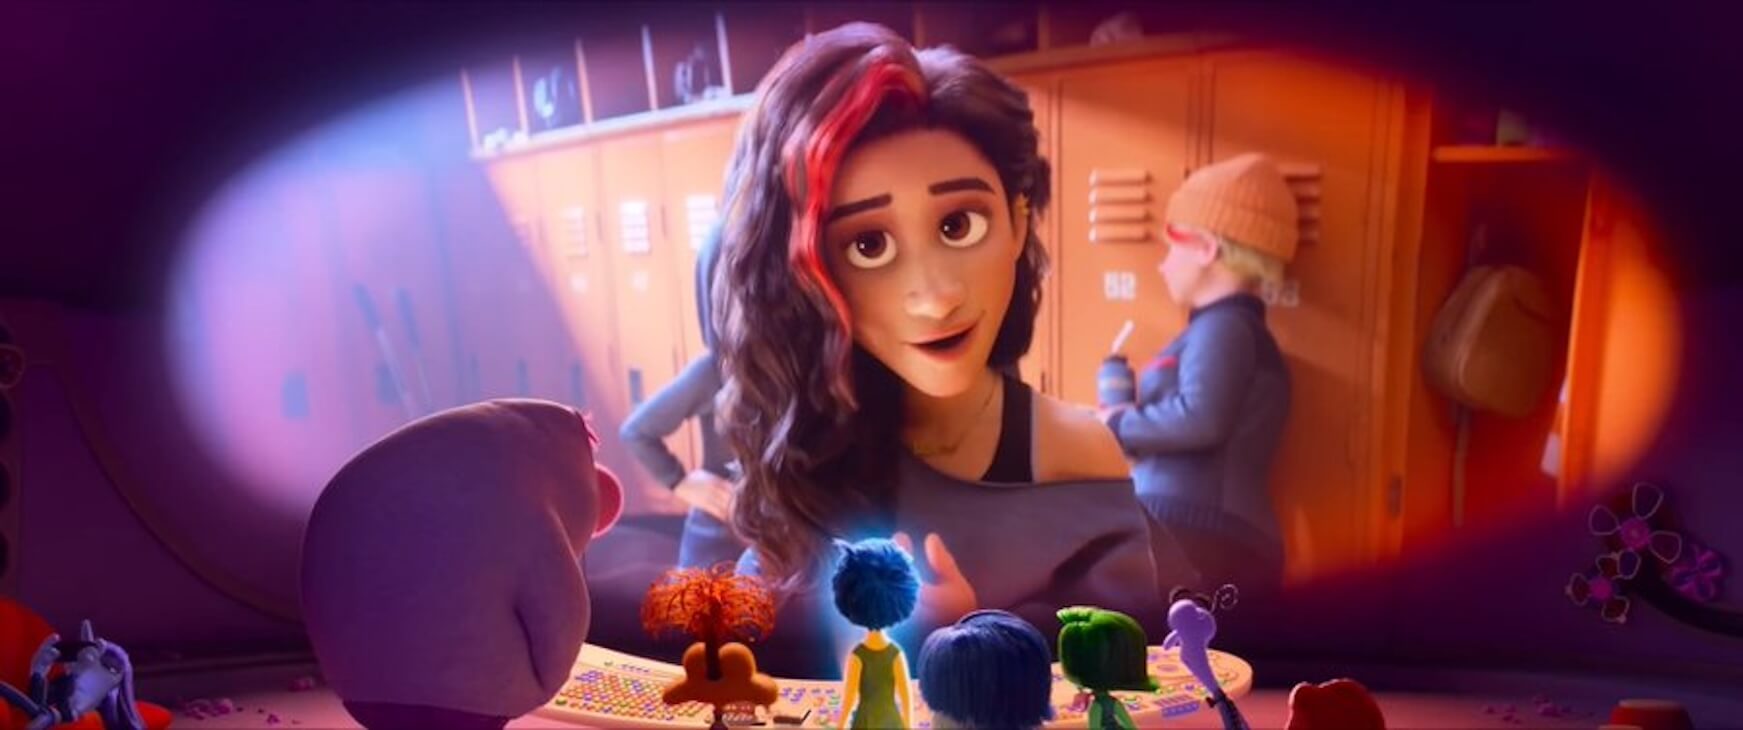 Inside Out 2, la protagonista Riley è queer? Video - Inside Out 2 Riley a - Gay.it